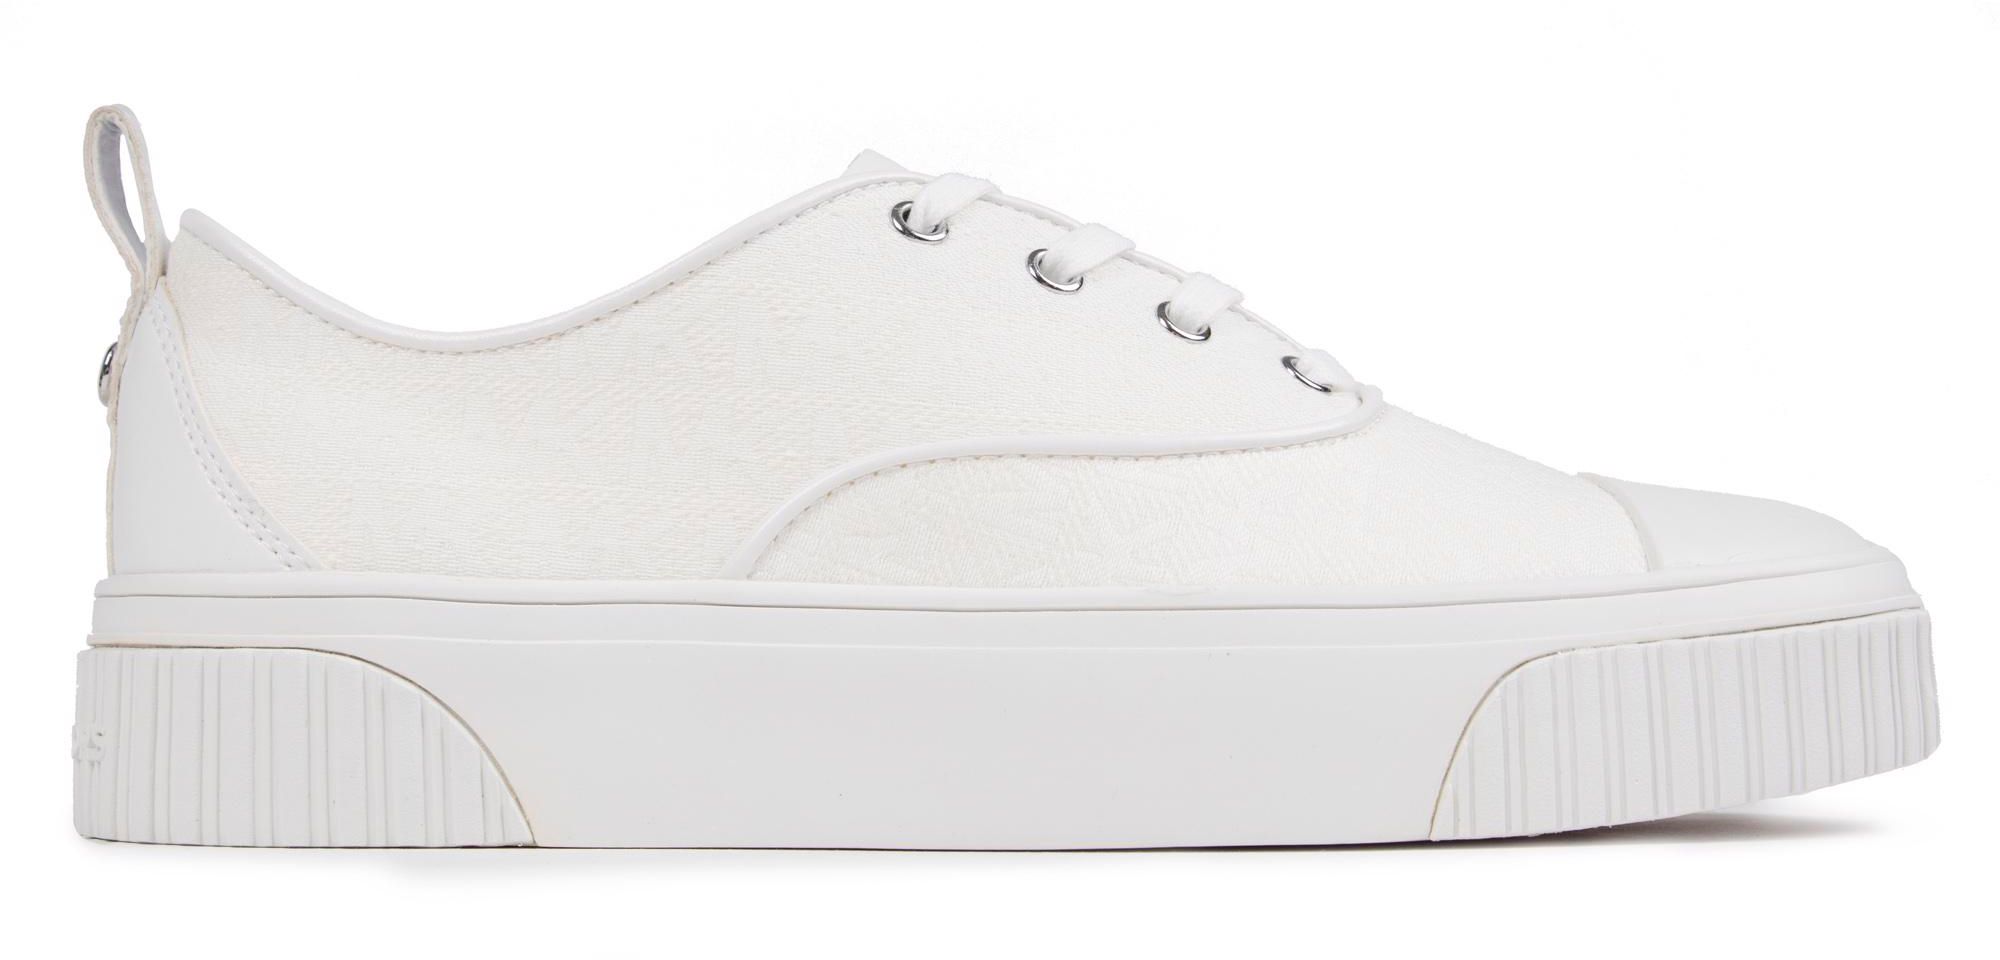 Womens Michael Kors Ollie Lace Up Sneakers In White | Soletrader